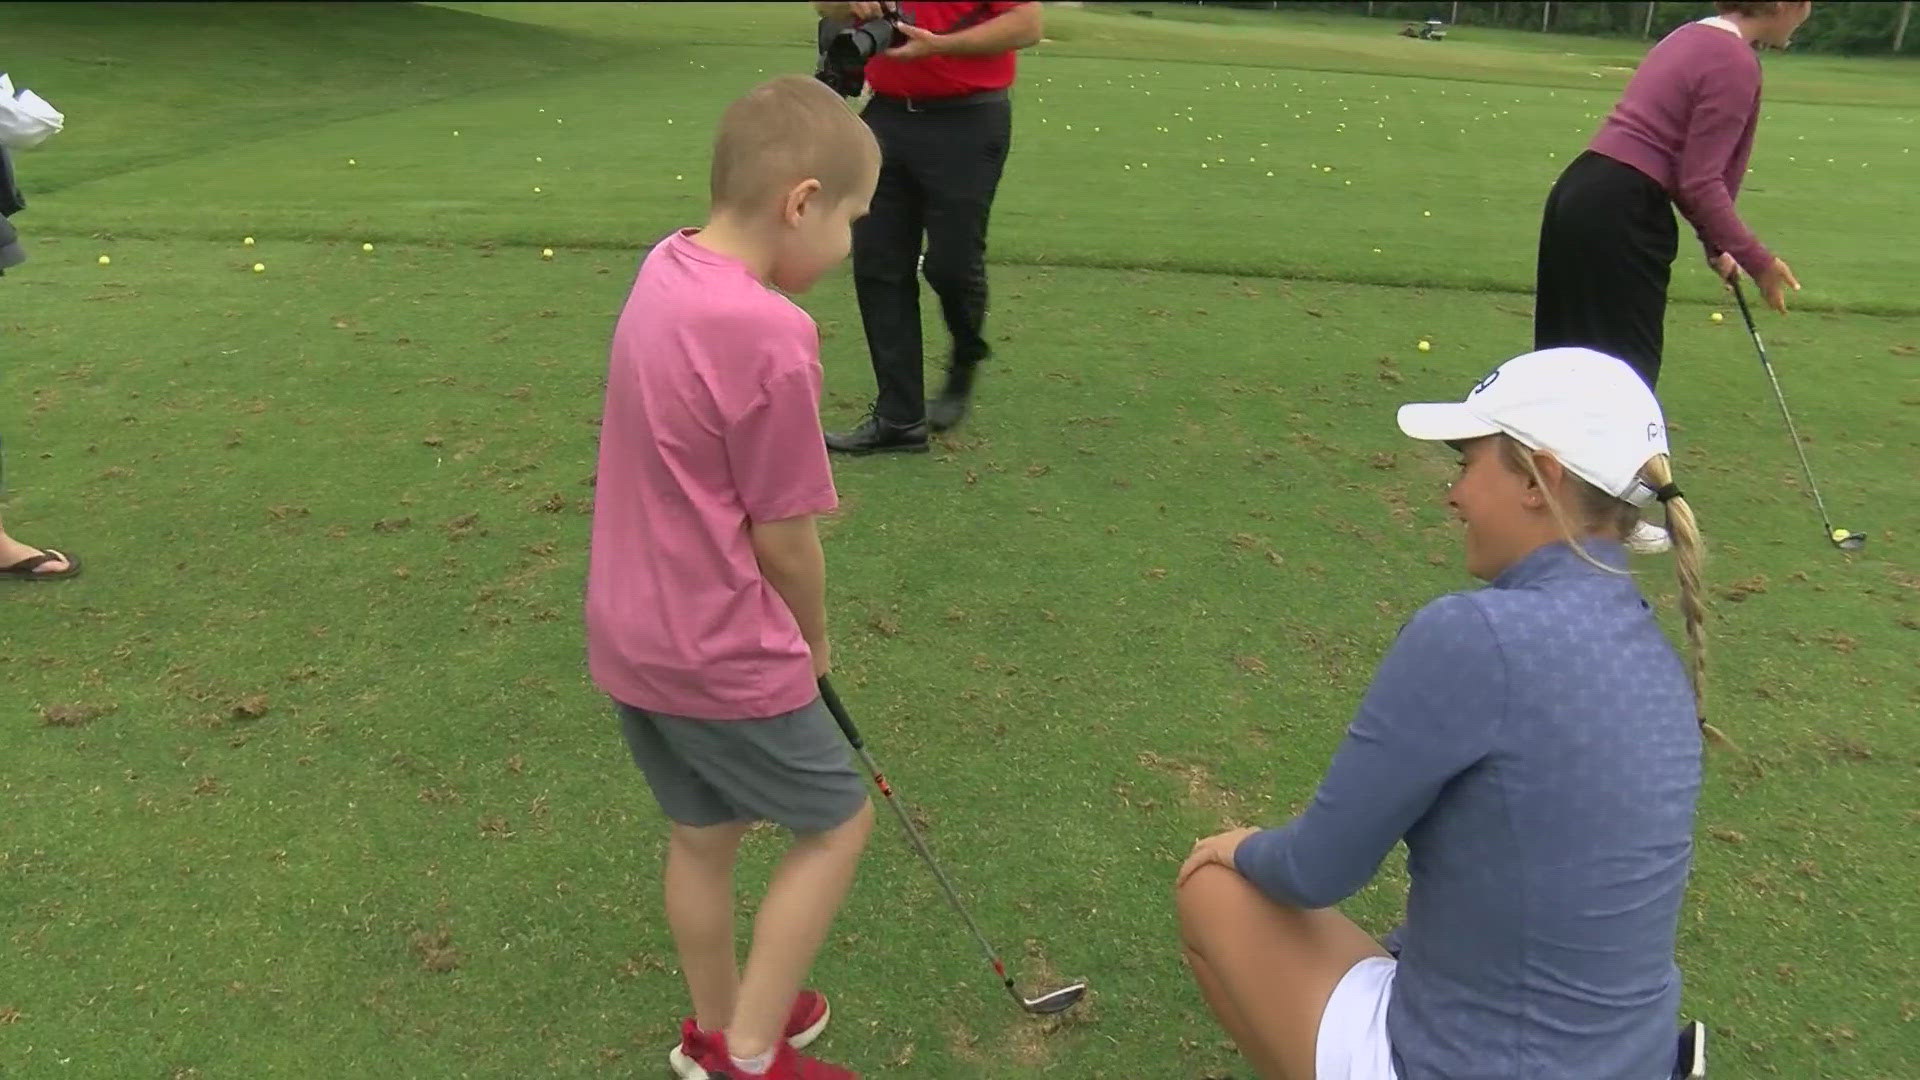 Six children from across northwest Ohio are sharing their stories and the course with LPGA stars ahead of the 40th anniversary of the Dana Open.